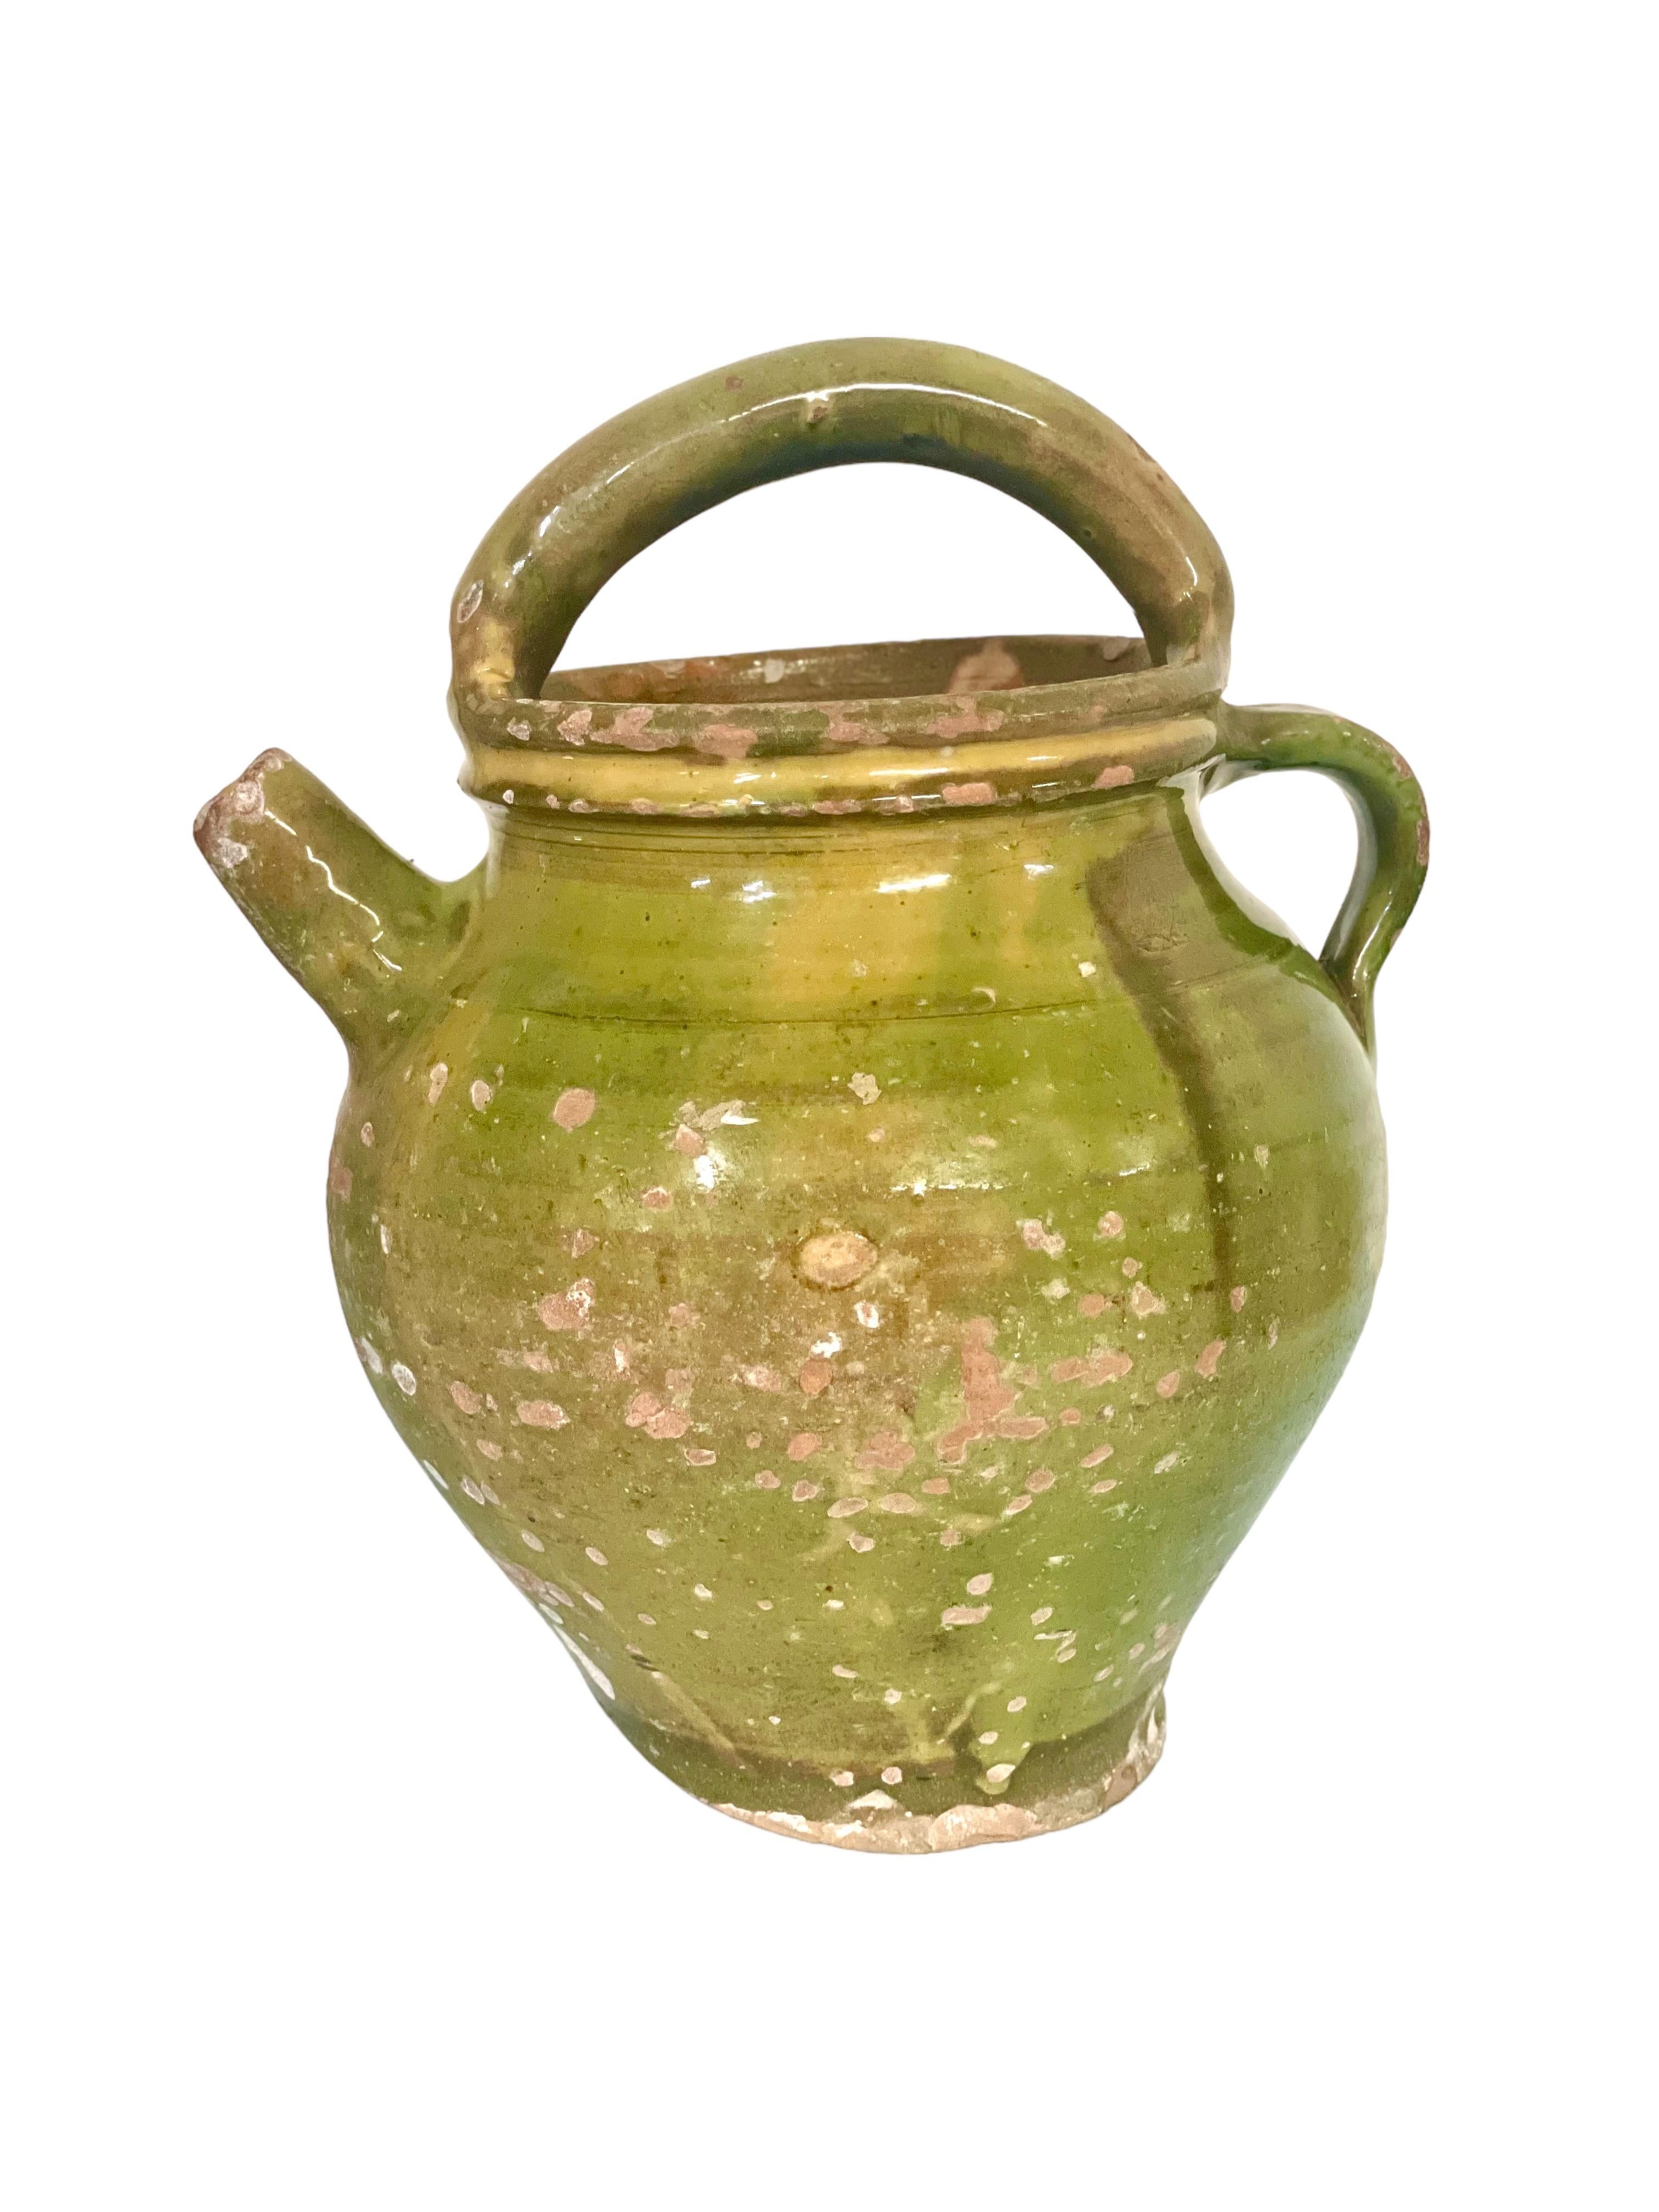 A superb 19th-century Provençal terracotta water cruche, with spout and handle, and glazed in traditional green. This beautiful vessel would have been used to transport water to workers in the farm fields, keeping it cool and clean, ready for